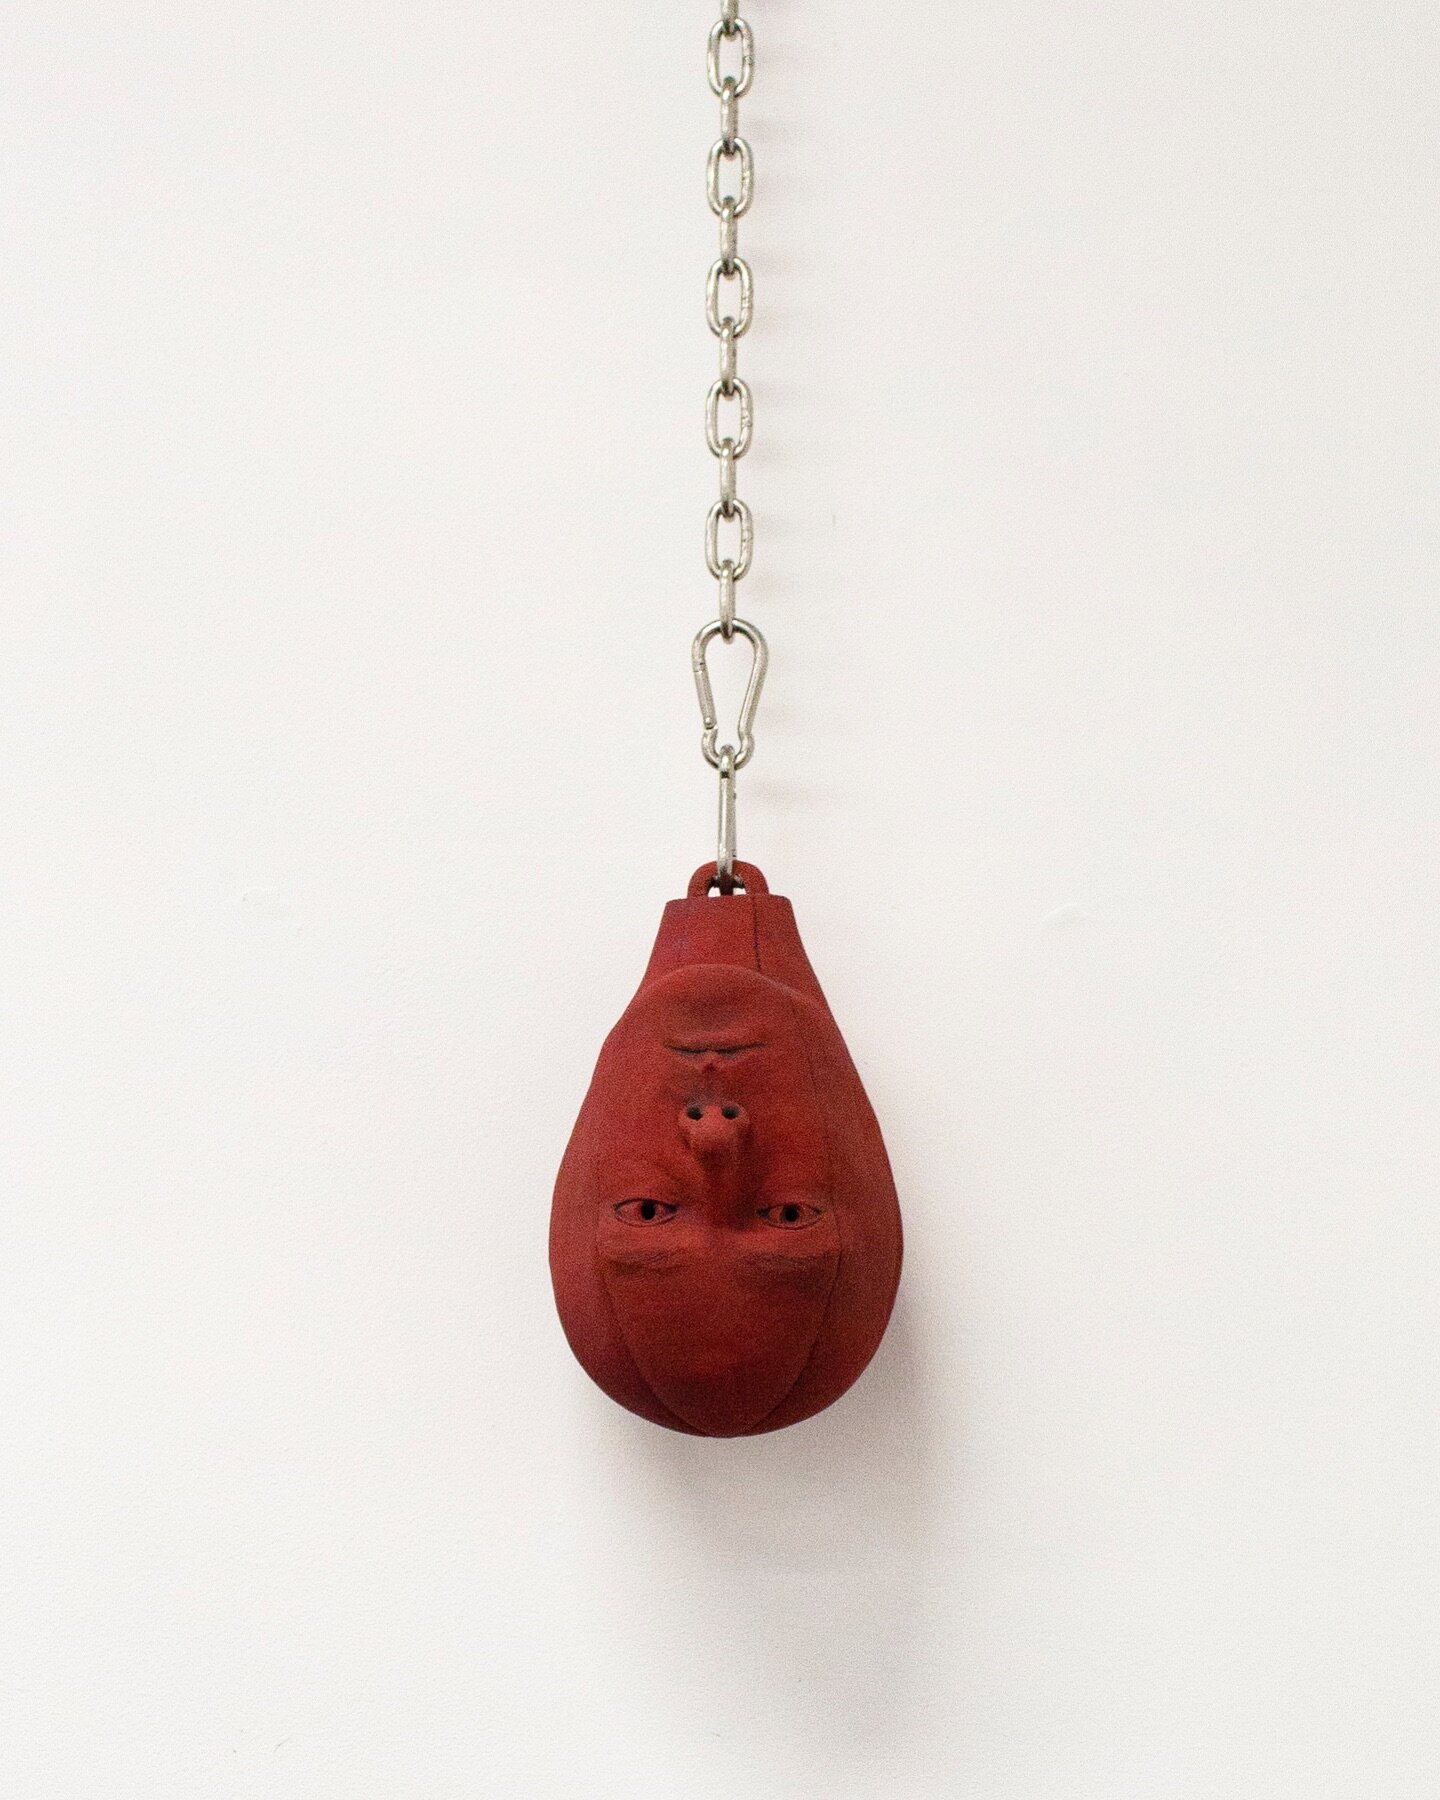 Physical, political (punching bag), 2023, ceramics

Red head

Finally got to show this work at my tafe exhibition last month. 

One day ill write a proper statement for it. For now: scaryscarypplscarydangerdonthurtmedonthurtusstopusingusasyourpunchin